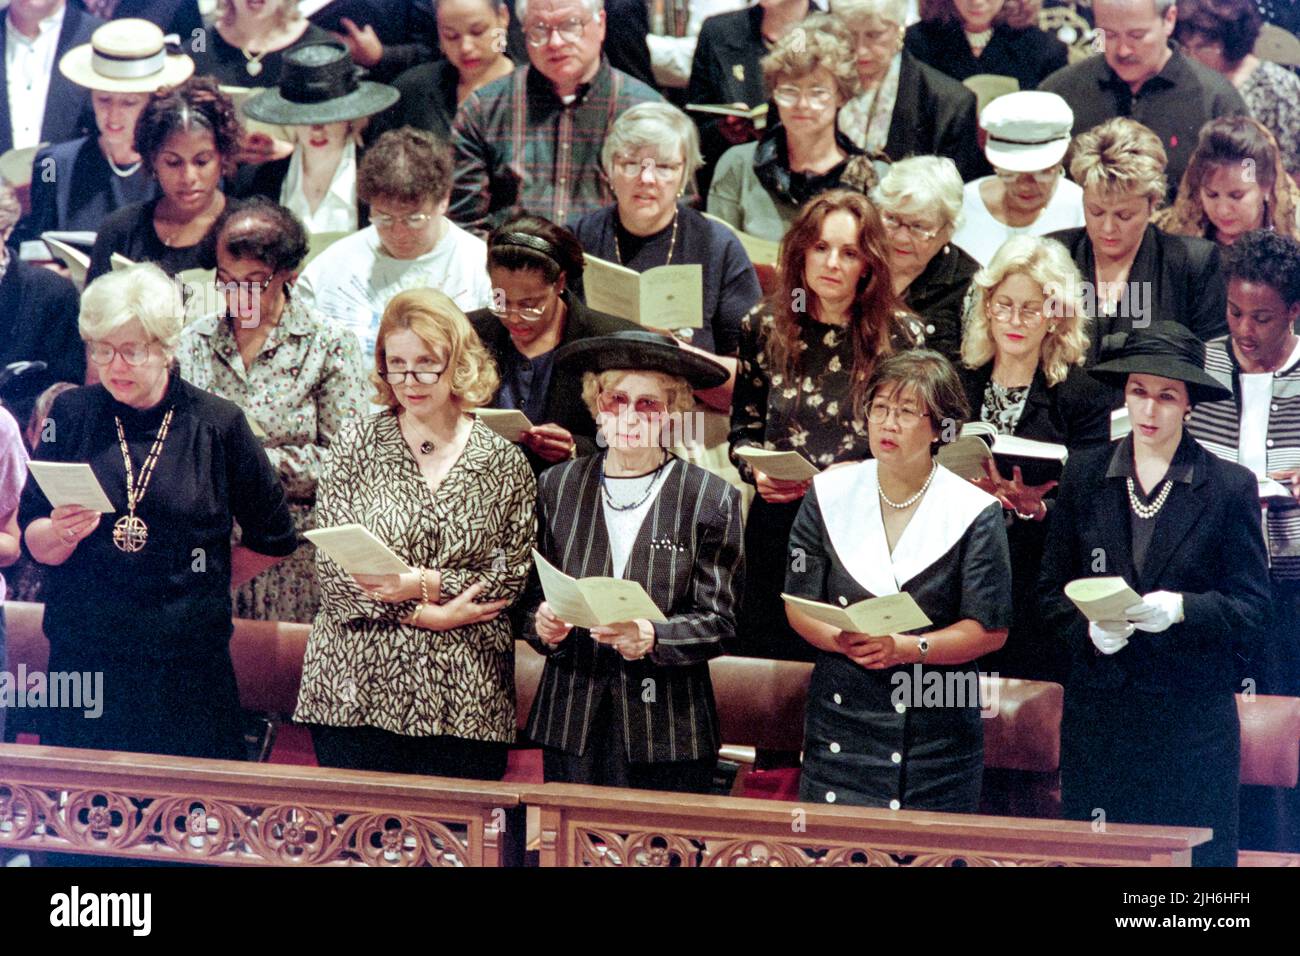 Members of the public gallery join in singing Hymn 608 during a memorial and prayer service to Diana, the Princess of Wales, on the occasion of her death at the Washington National Cathedral, September 6, 1997, in Washington, D.C. Stock Photo